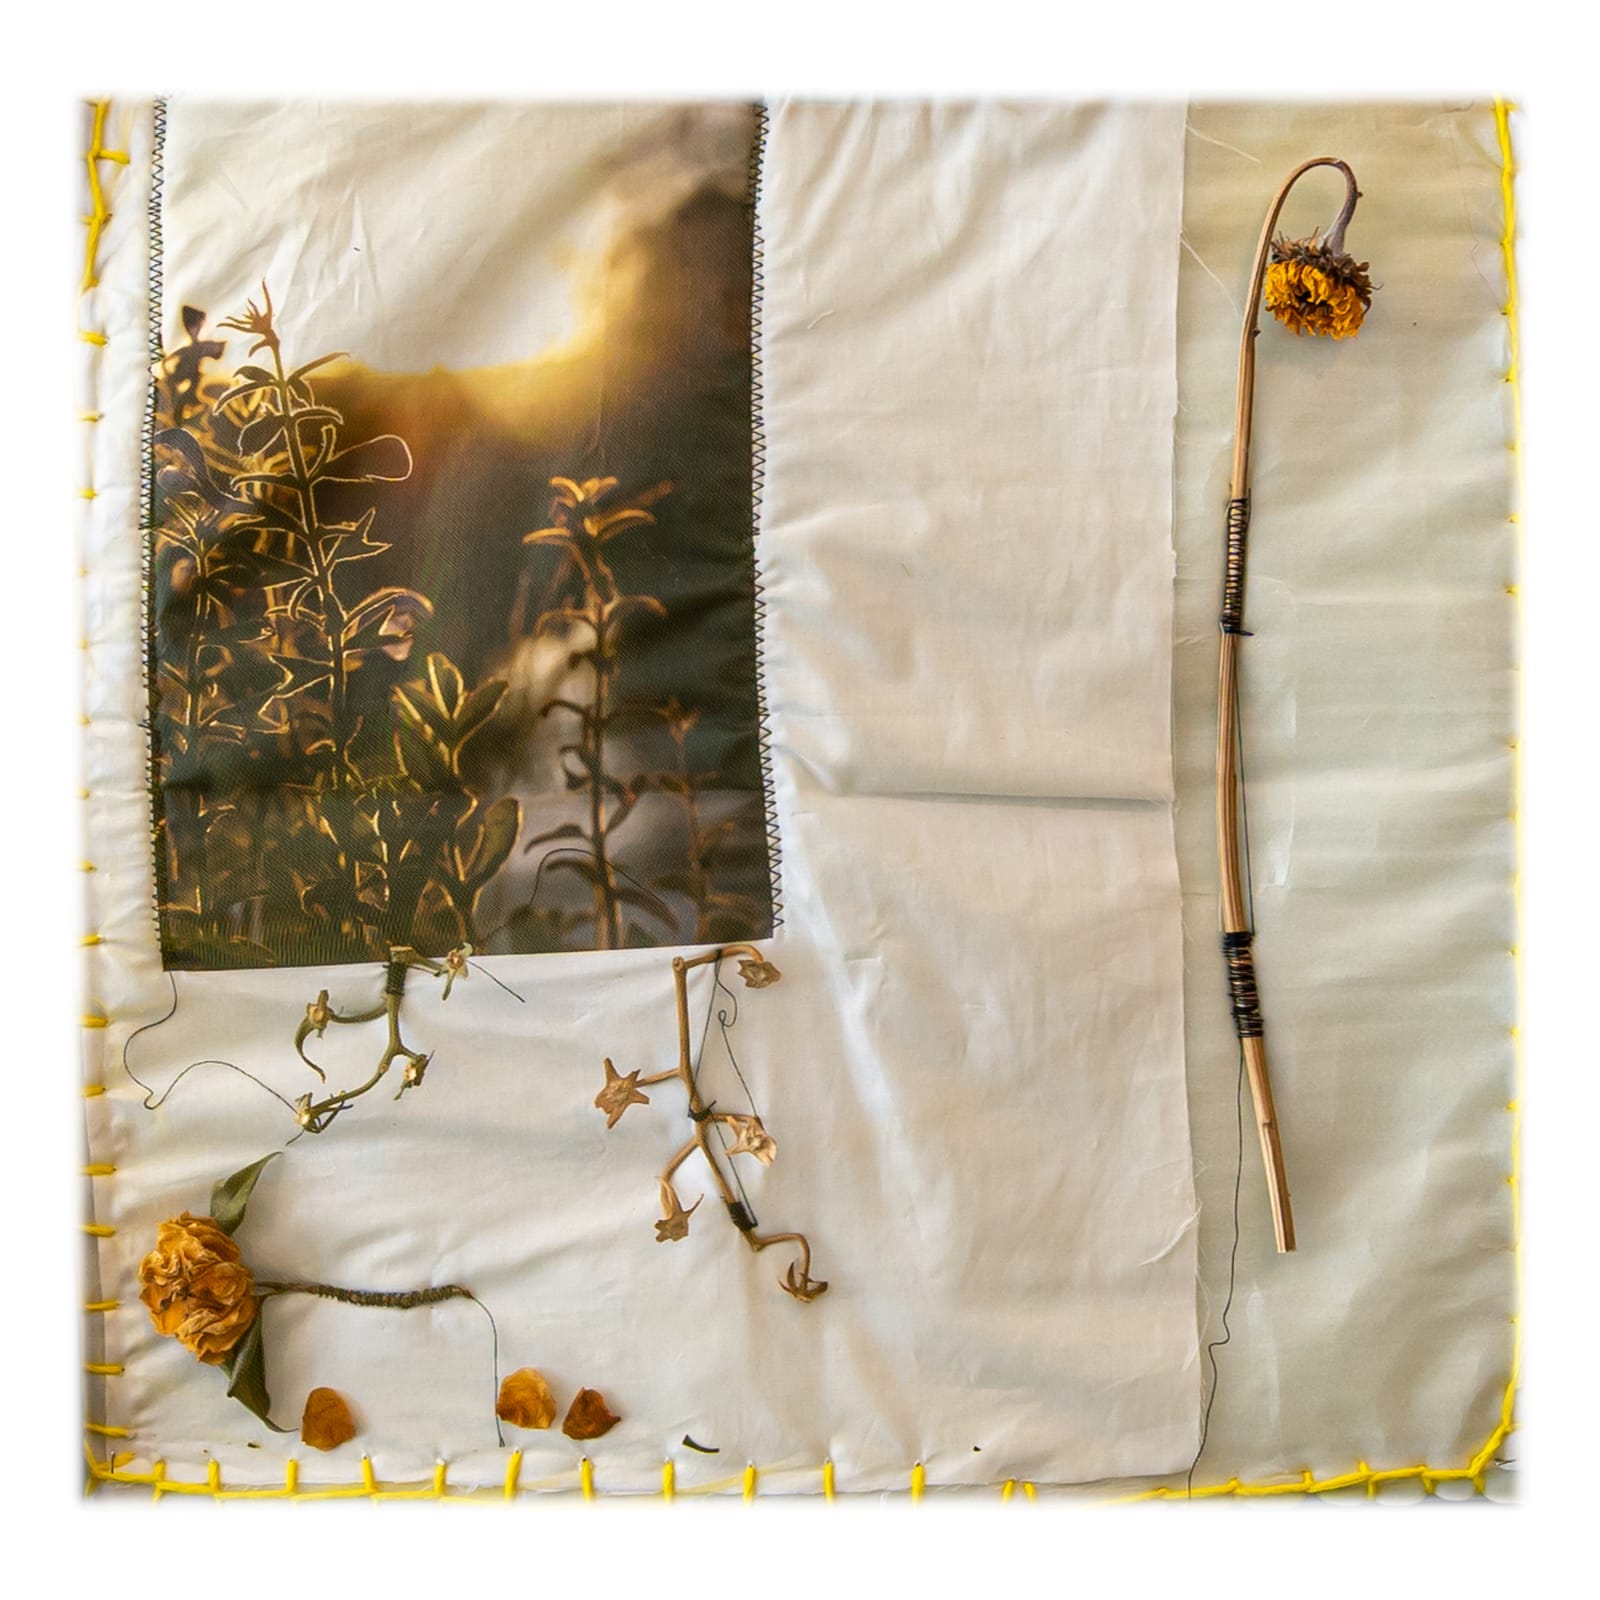 Juliana Torres I Catalog, 2021 Printed photo, natural flowers, sticks and leaves applied on wrapping foam and covered with tulle